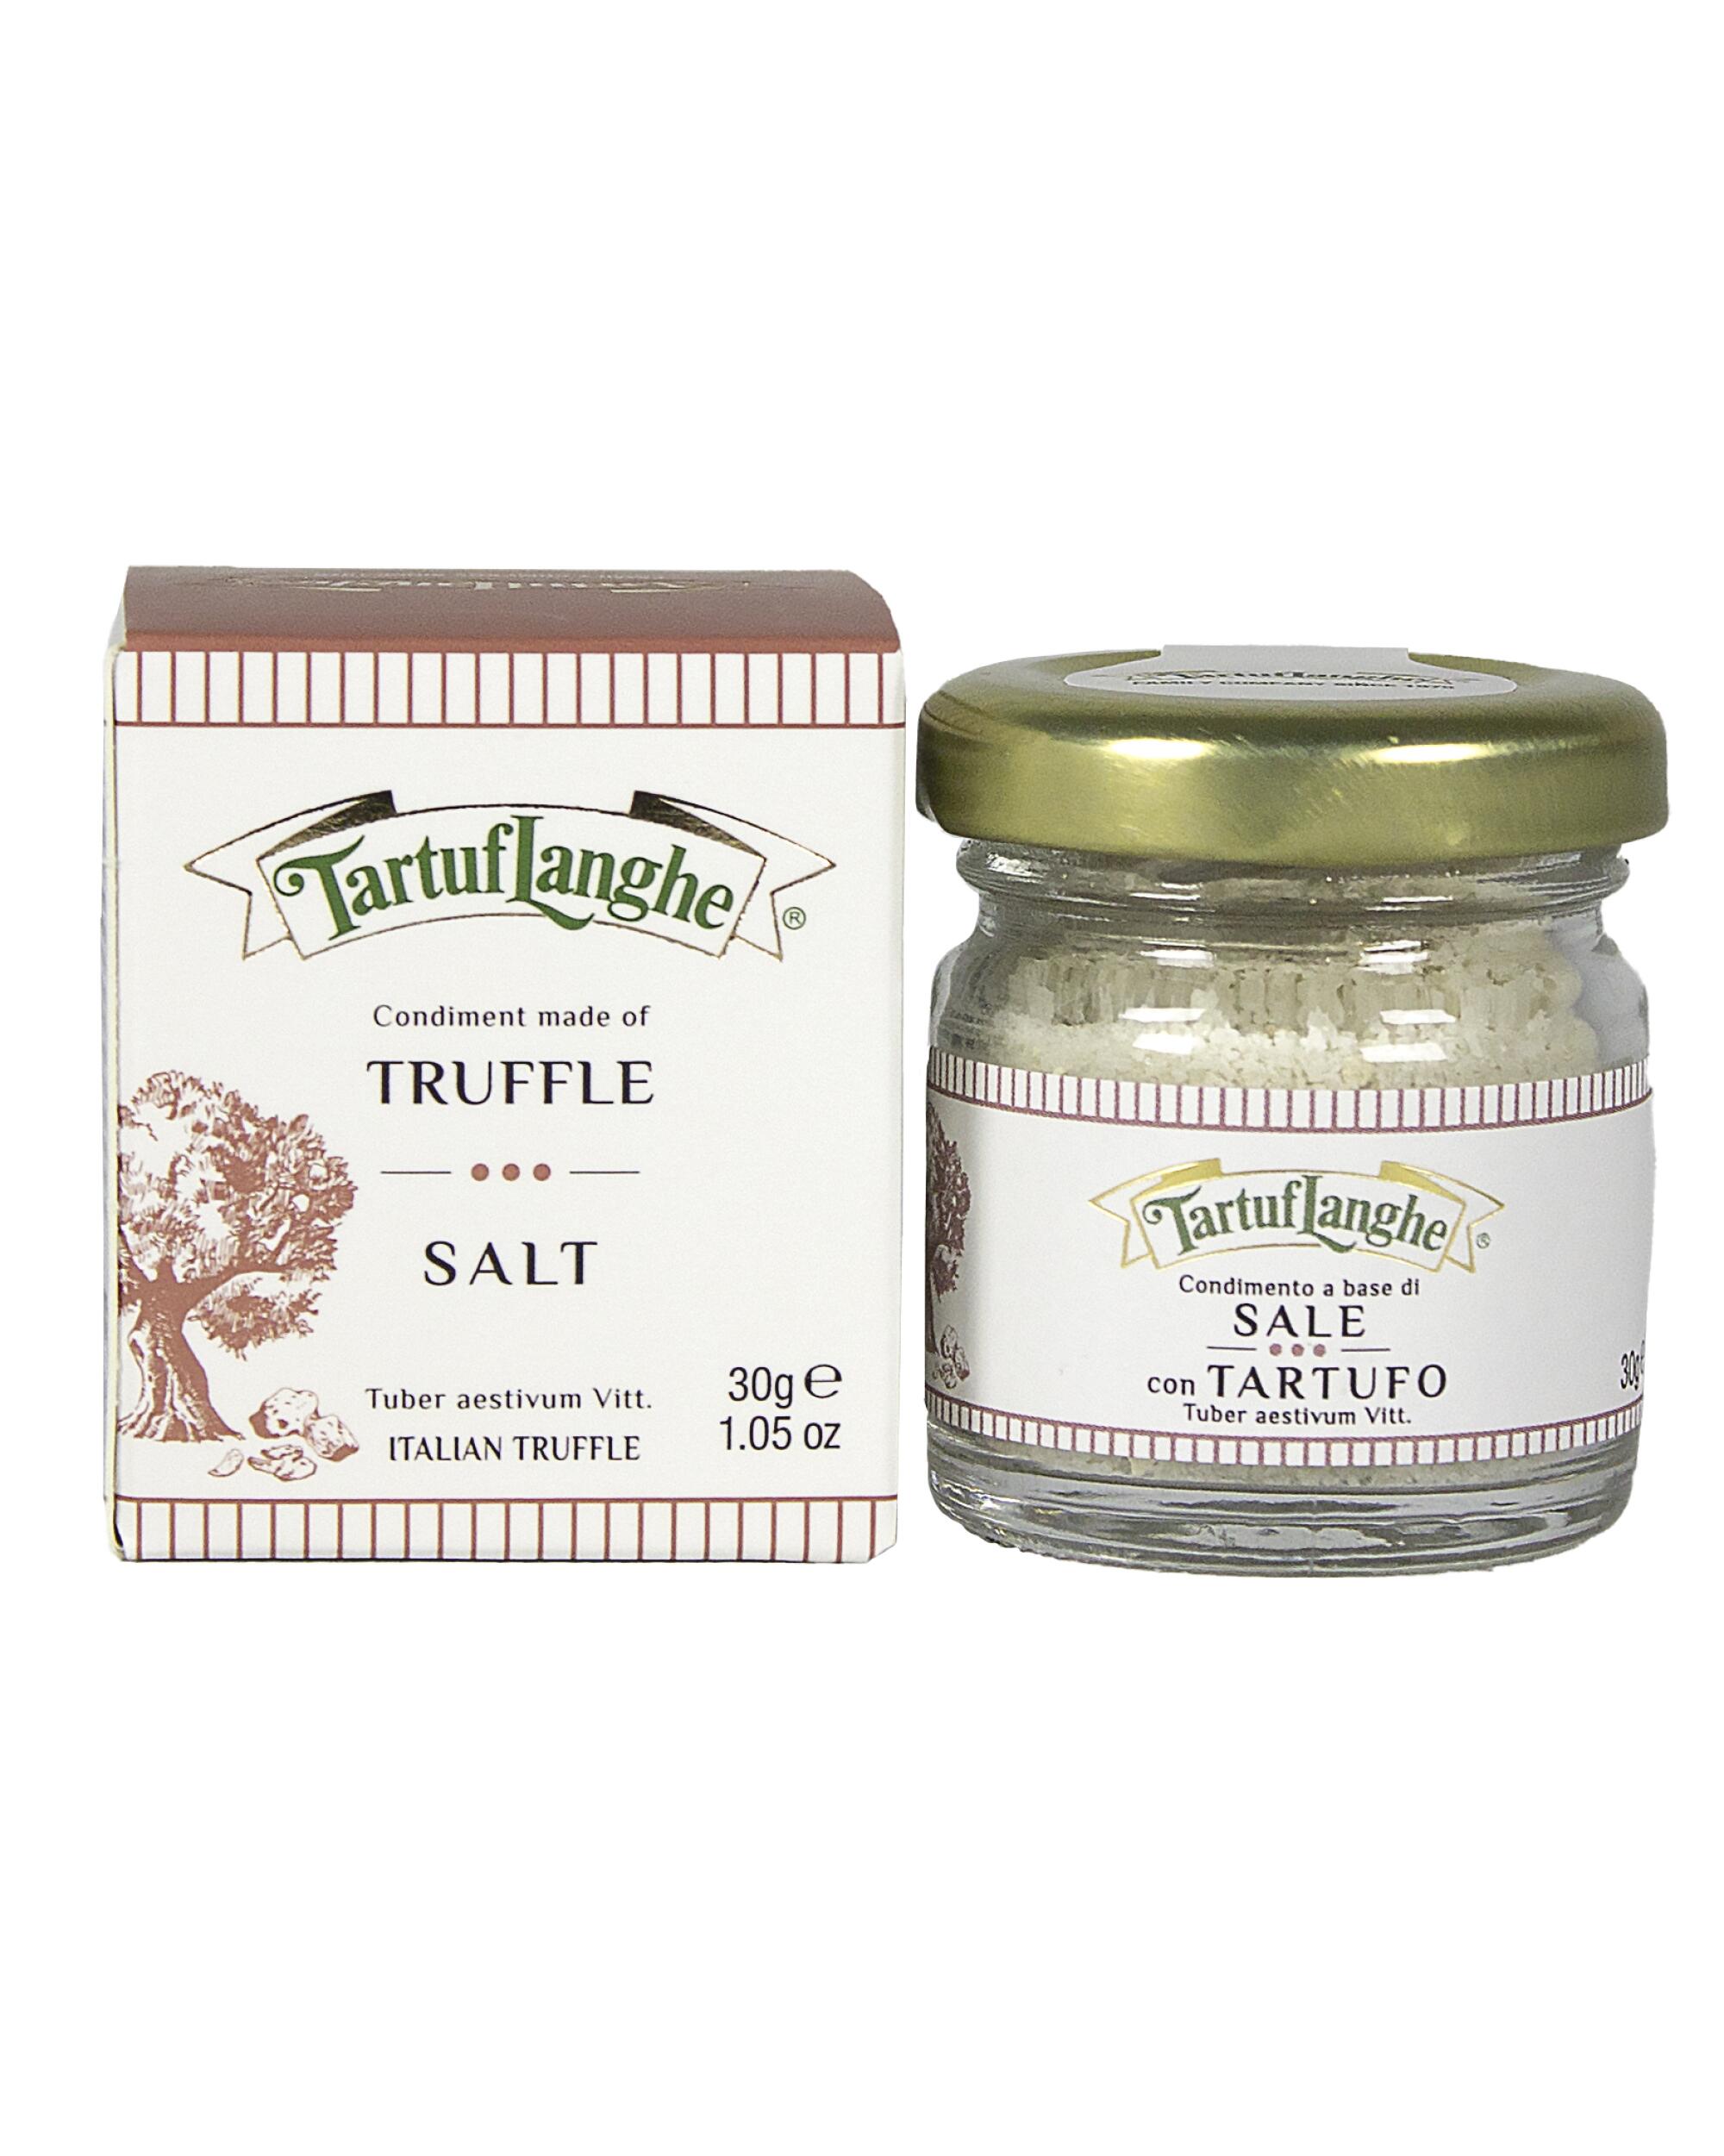 Black Truffle Salt for tiny gifts for Christmas stockings list for the LA Times 2022 Gift Guide.